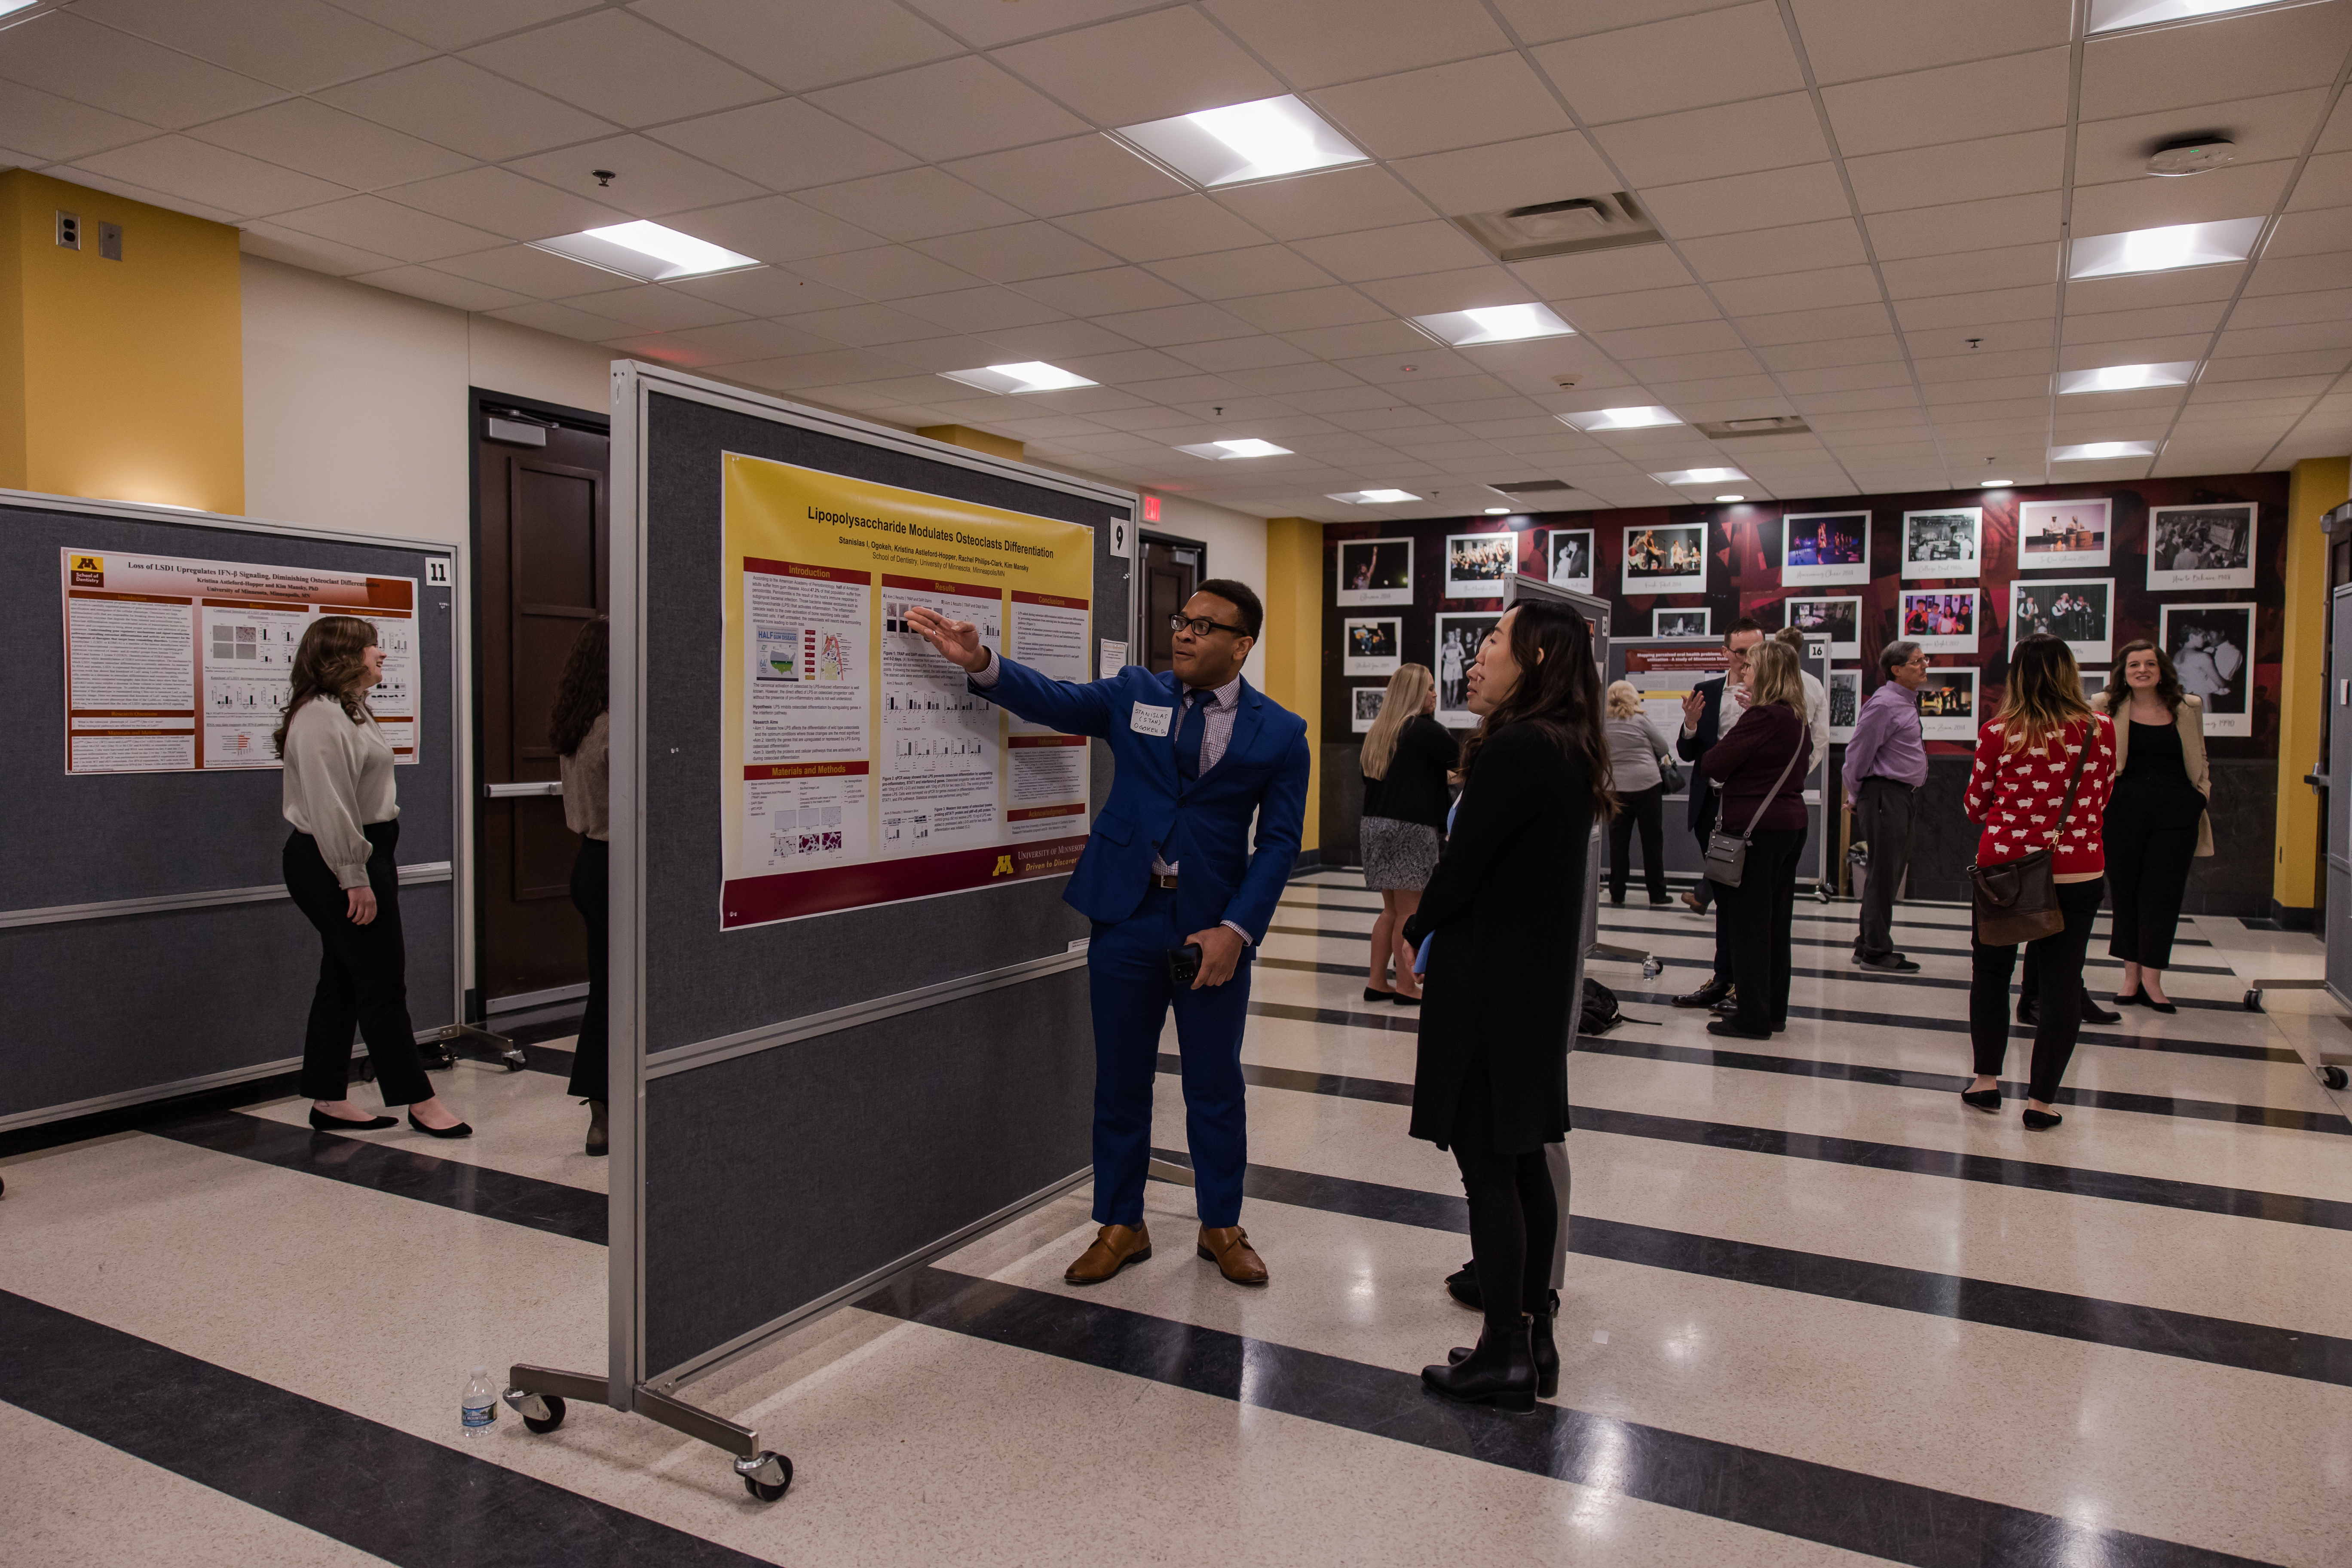 A student researcher discusses his poster with attendees